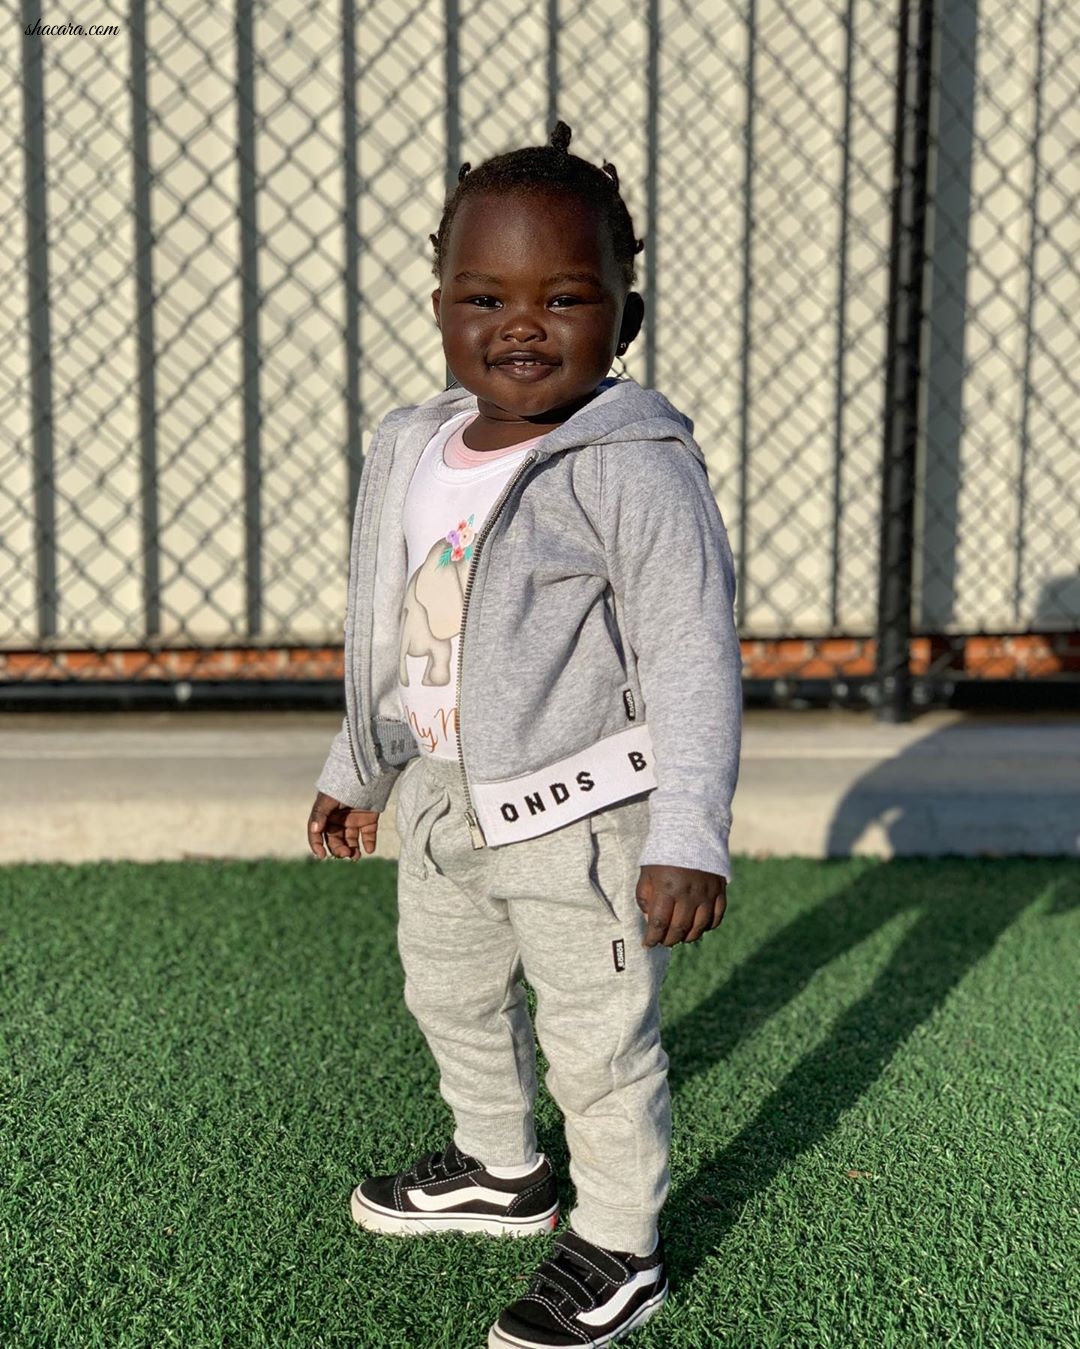 The World’s Cutest Baby Just Started Walking & It’s The Most Beautiful Thing You Will See Today